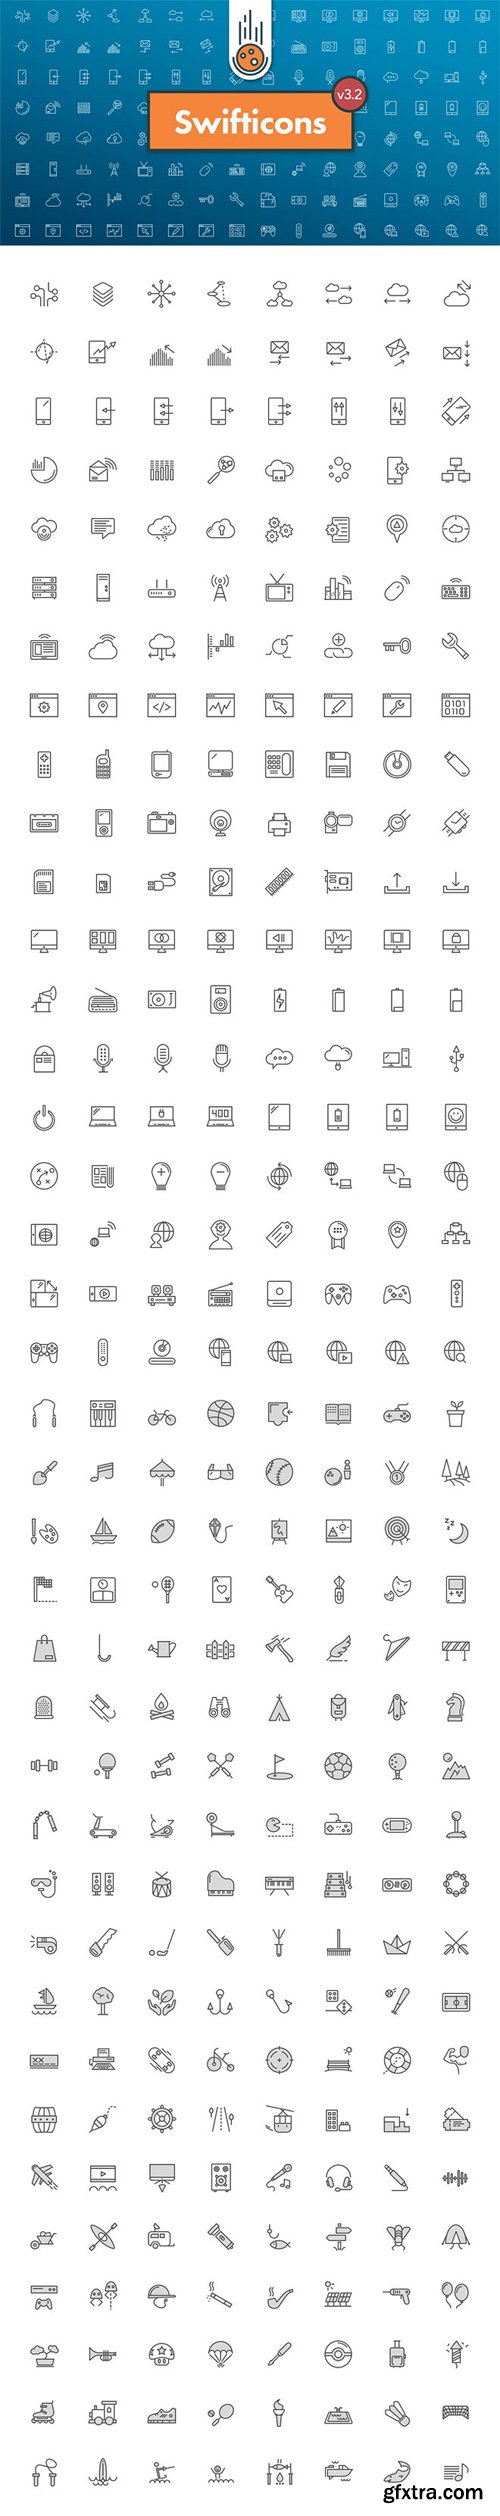 300+ Tech & Activities Icons in Vector [AI/EPS/SVG/PNG/SKETCH]